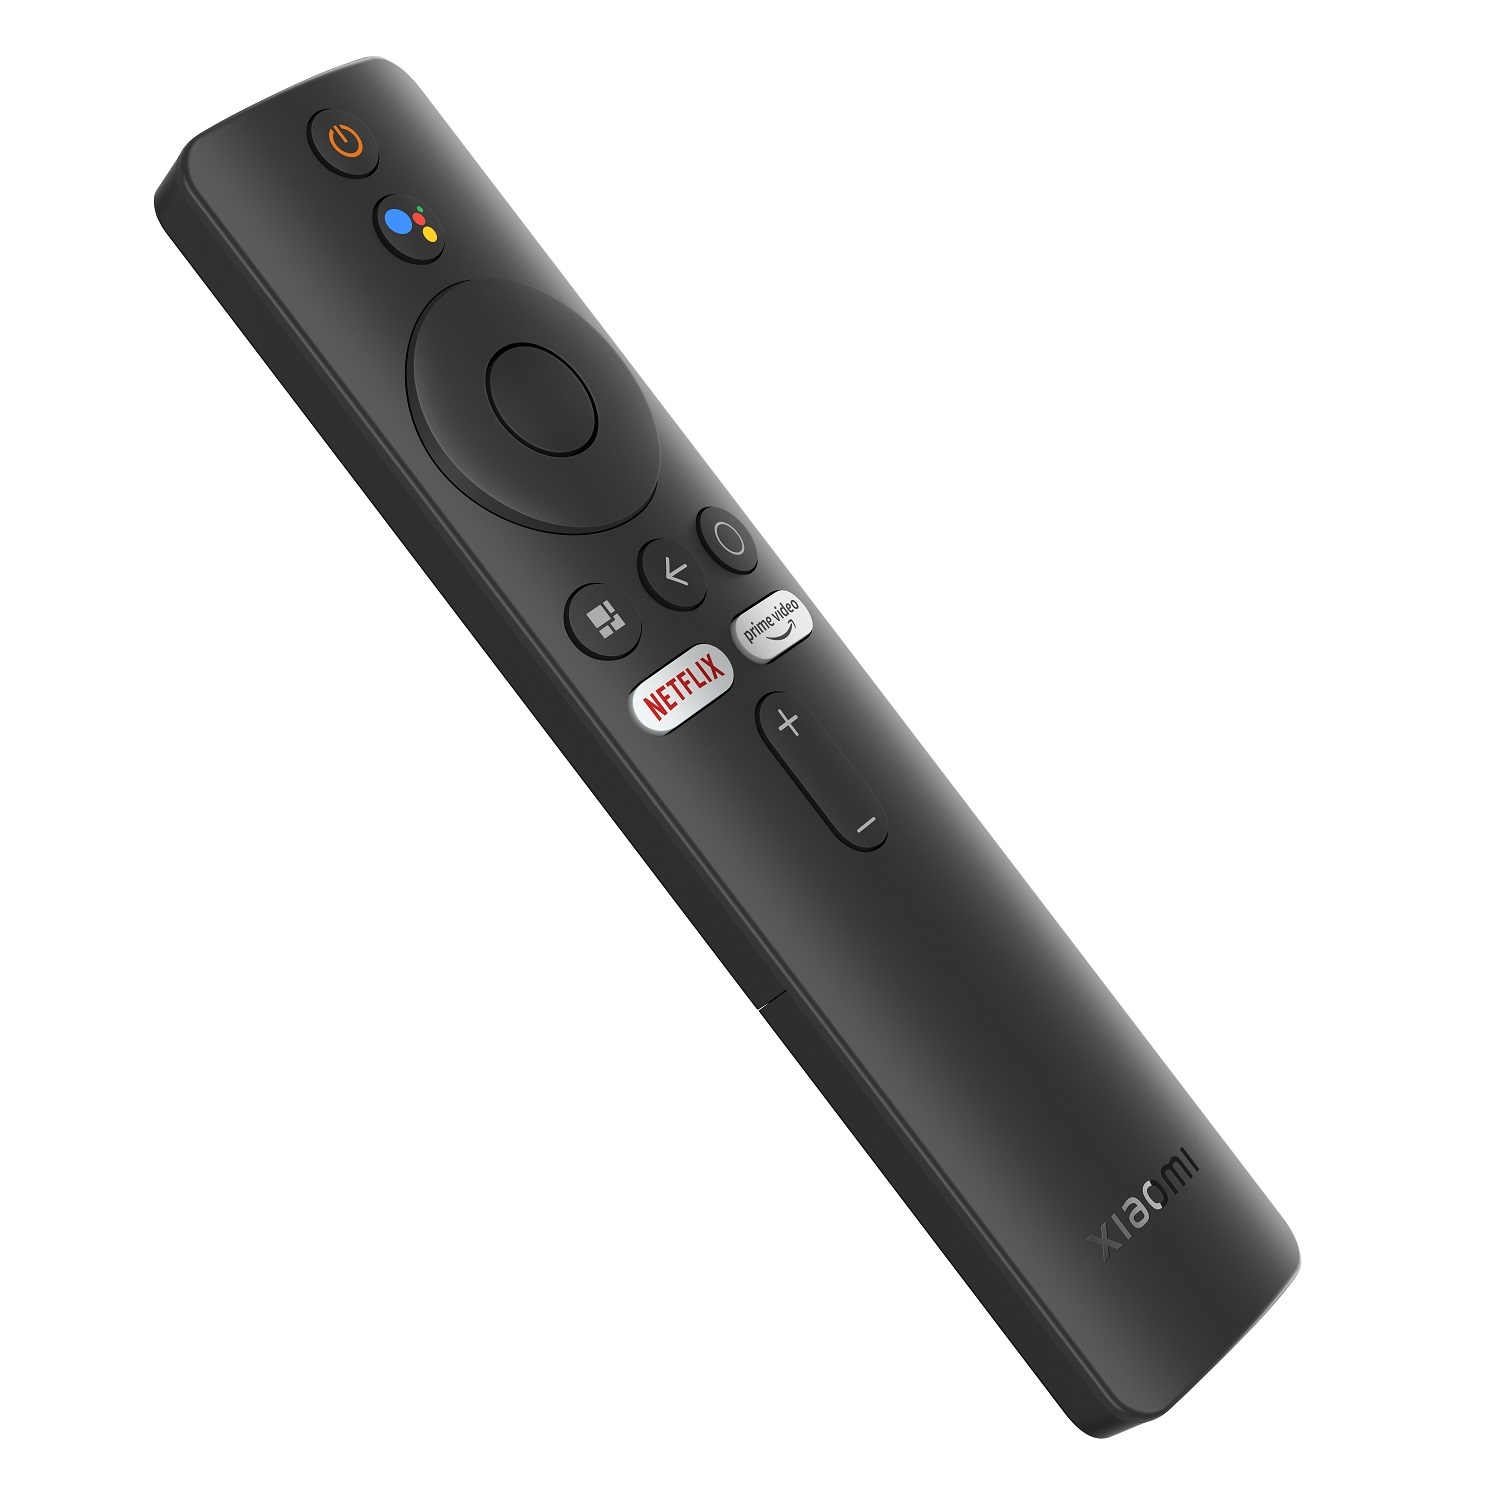 Xiaomi Mi TV Stick is real, could be powerful for a stick